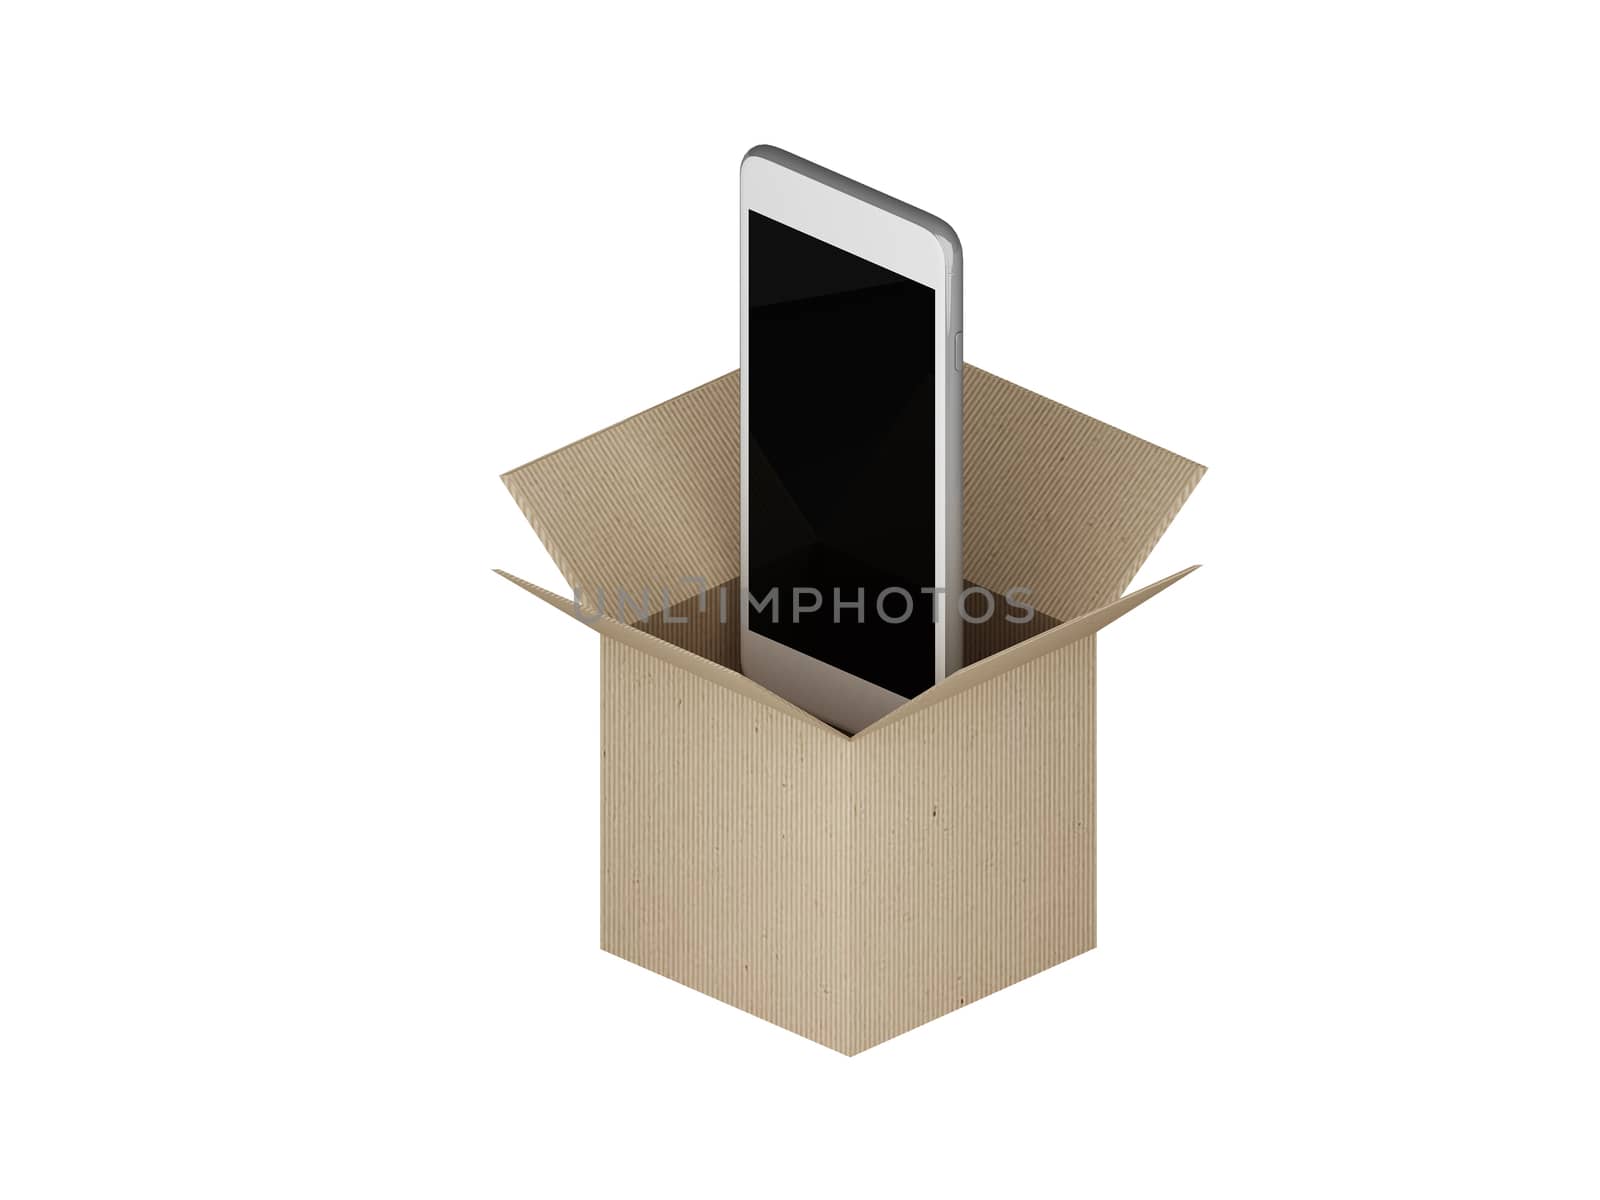 Smart phones out of the box in brown paper